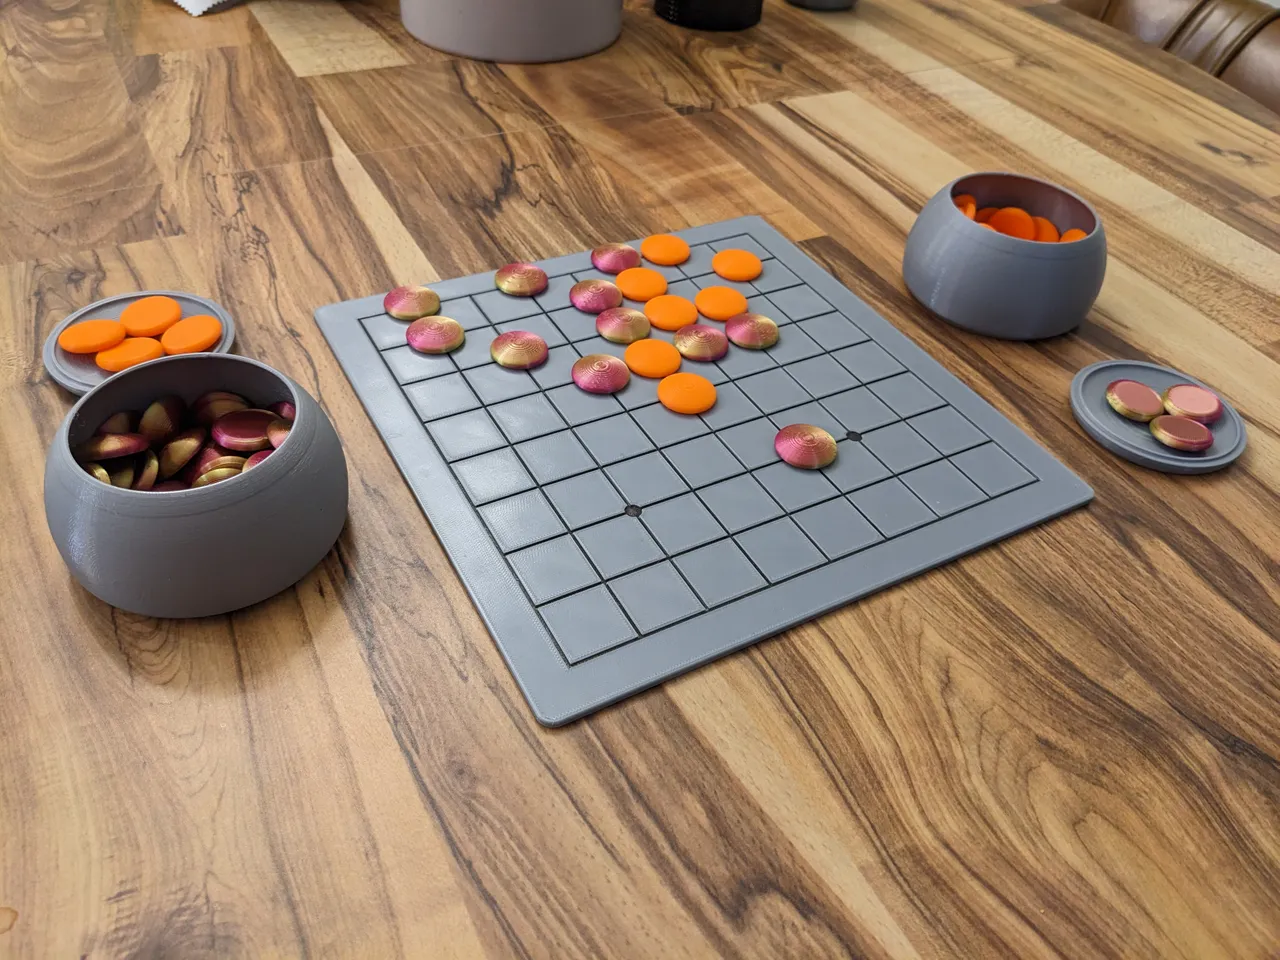 A set of grey Go bowls and a 9x9 Go board with an orange set and a purple set of Go stones.